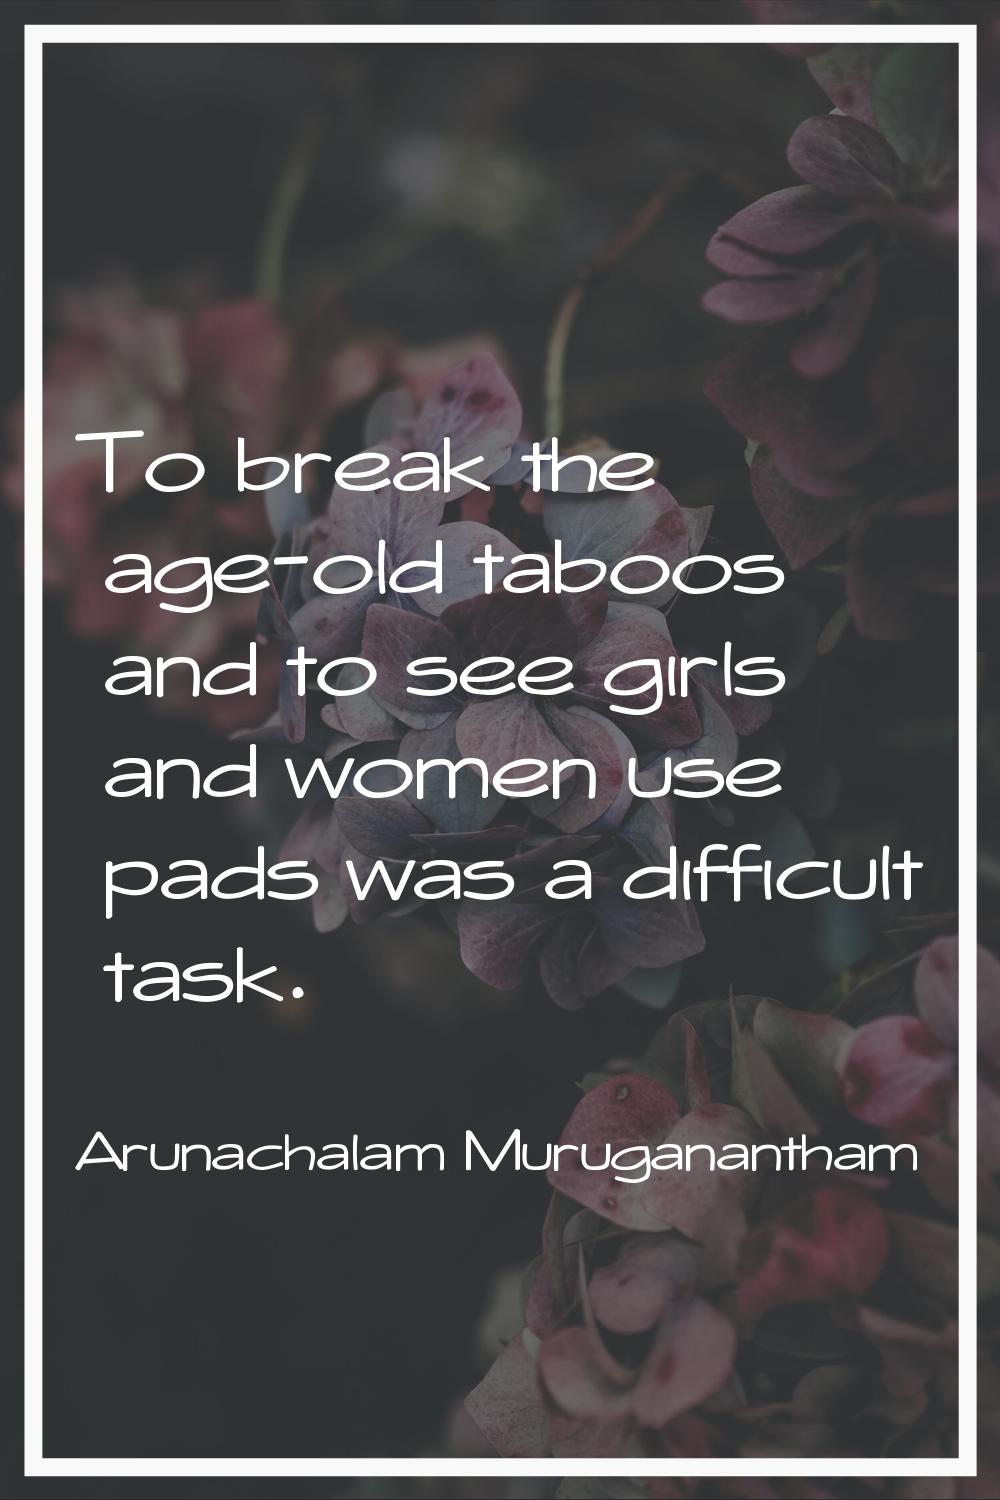 To break the age-old taboos and to see girls and women use pads was a difficult task.